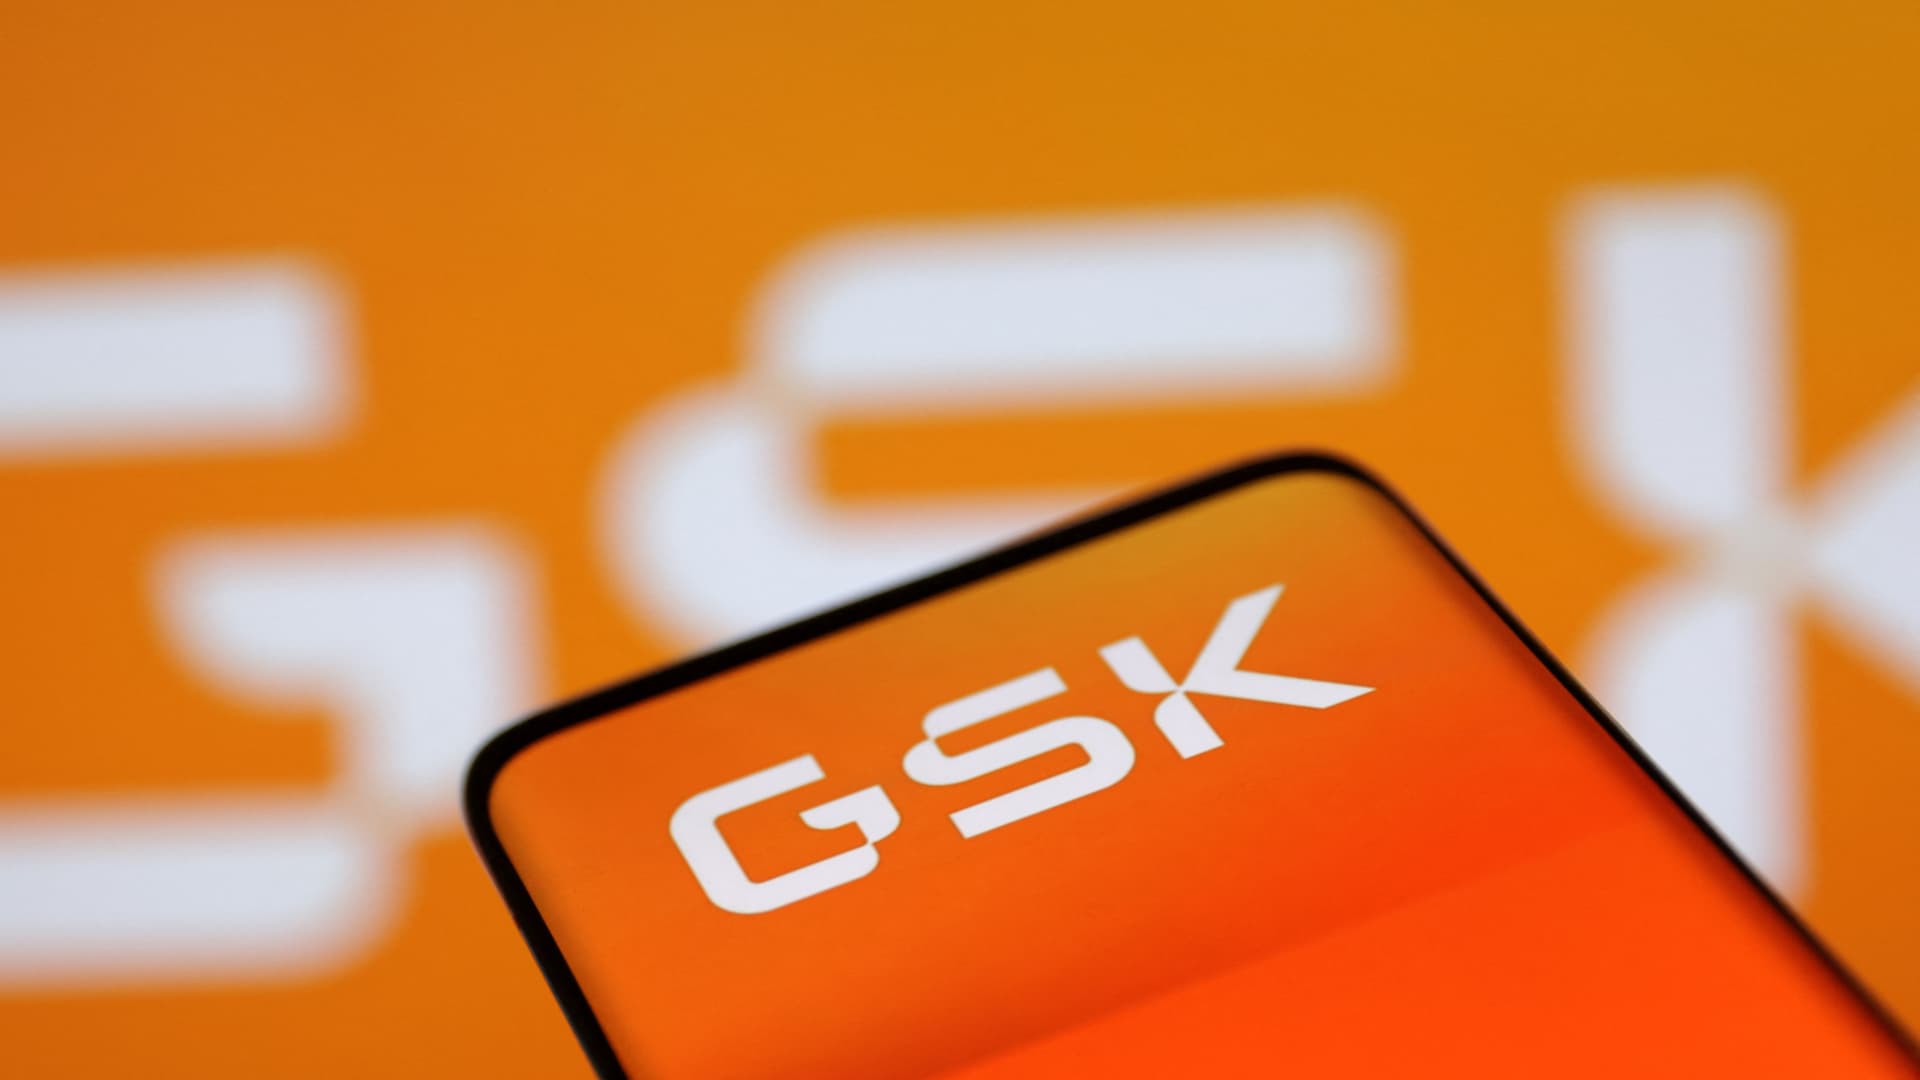 GSK posts blowout RSV vaccine gross sales, raises outlook as shots give big pharma a boost